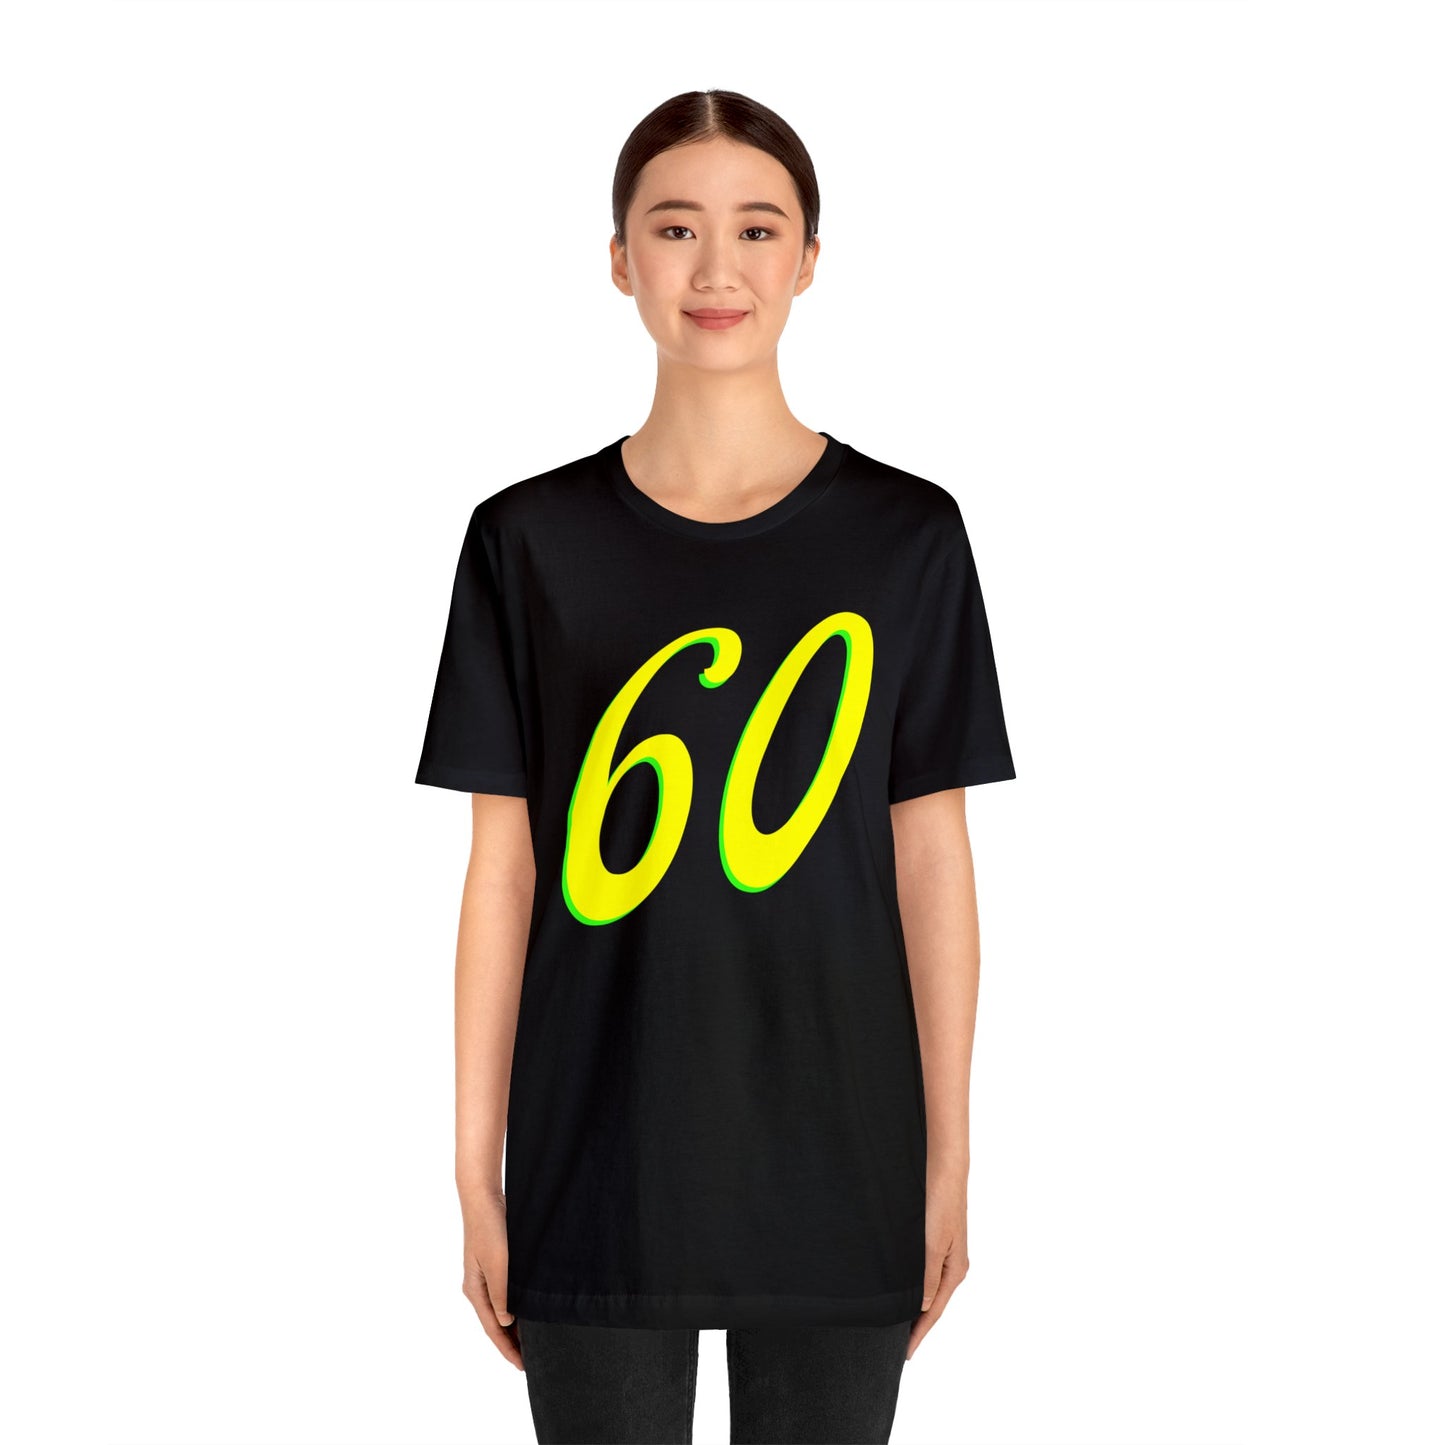 Number 60 Design - Soft Cotton Tee for birthdays and celebrations, Gift for friends and family, Multiple Options by clothezy.com in Asphalt Size Medium - Buy Now